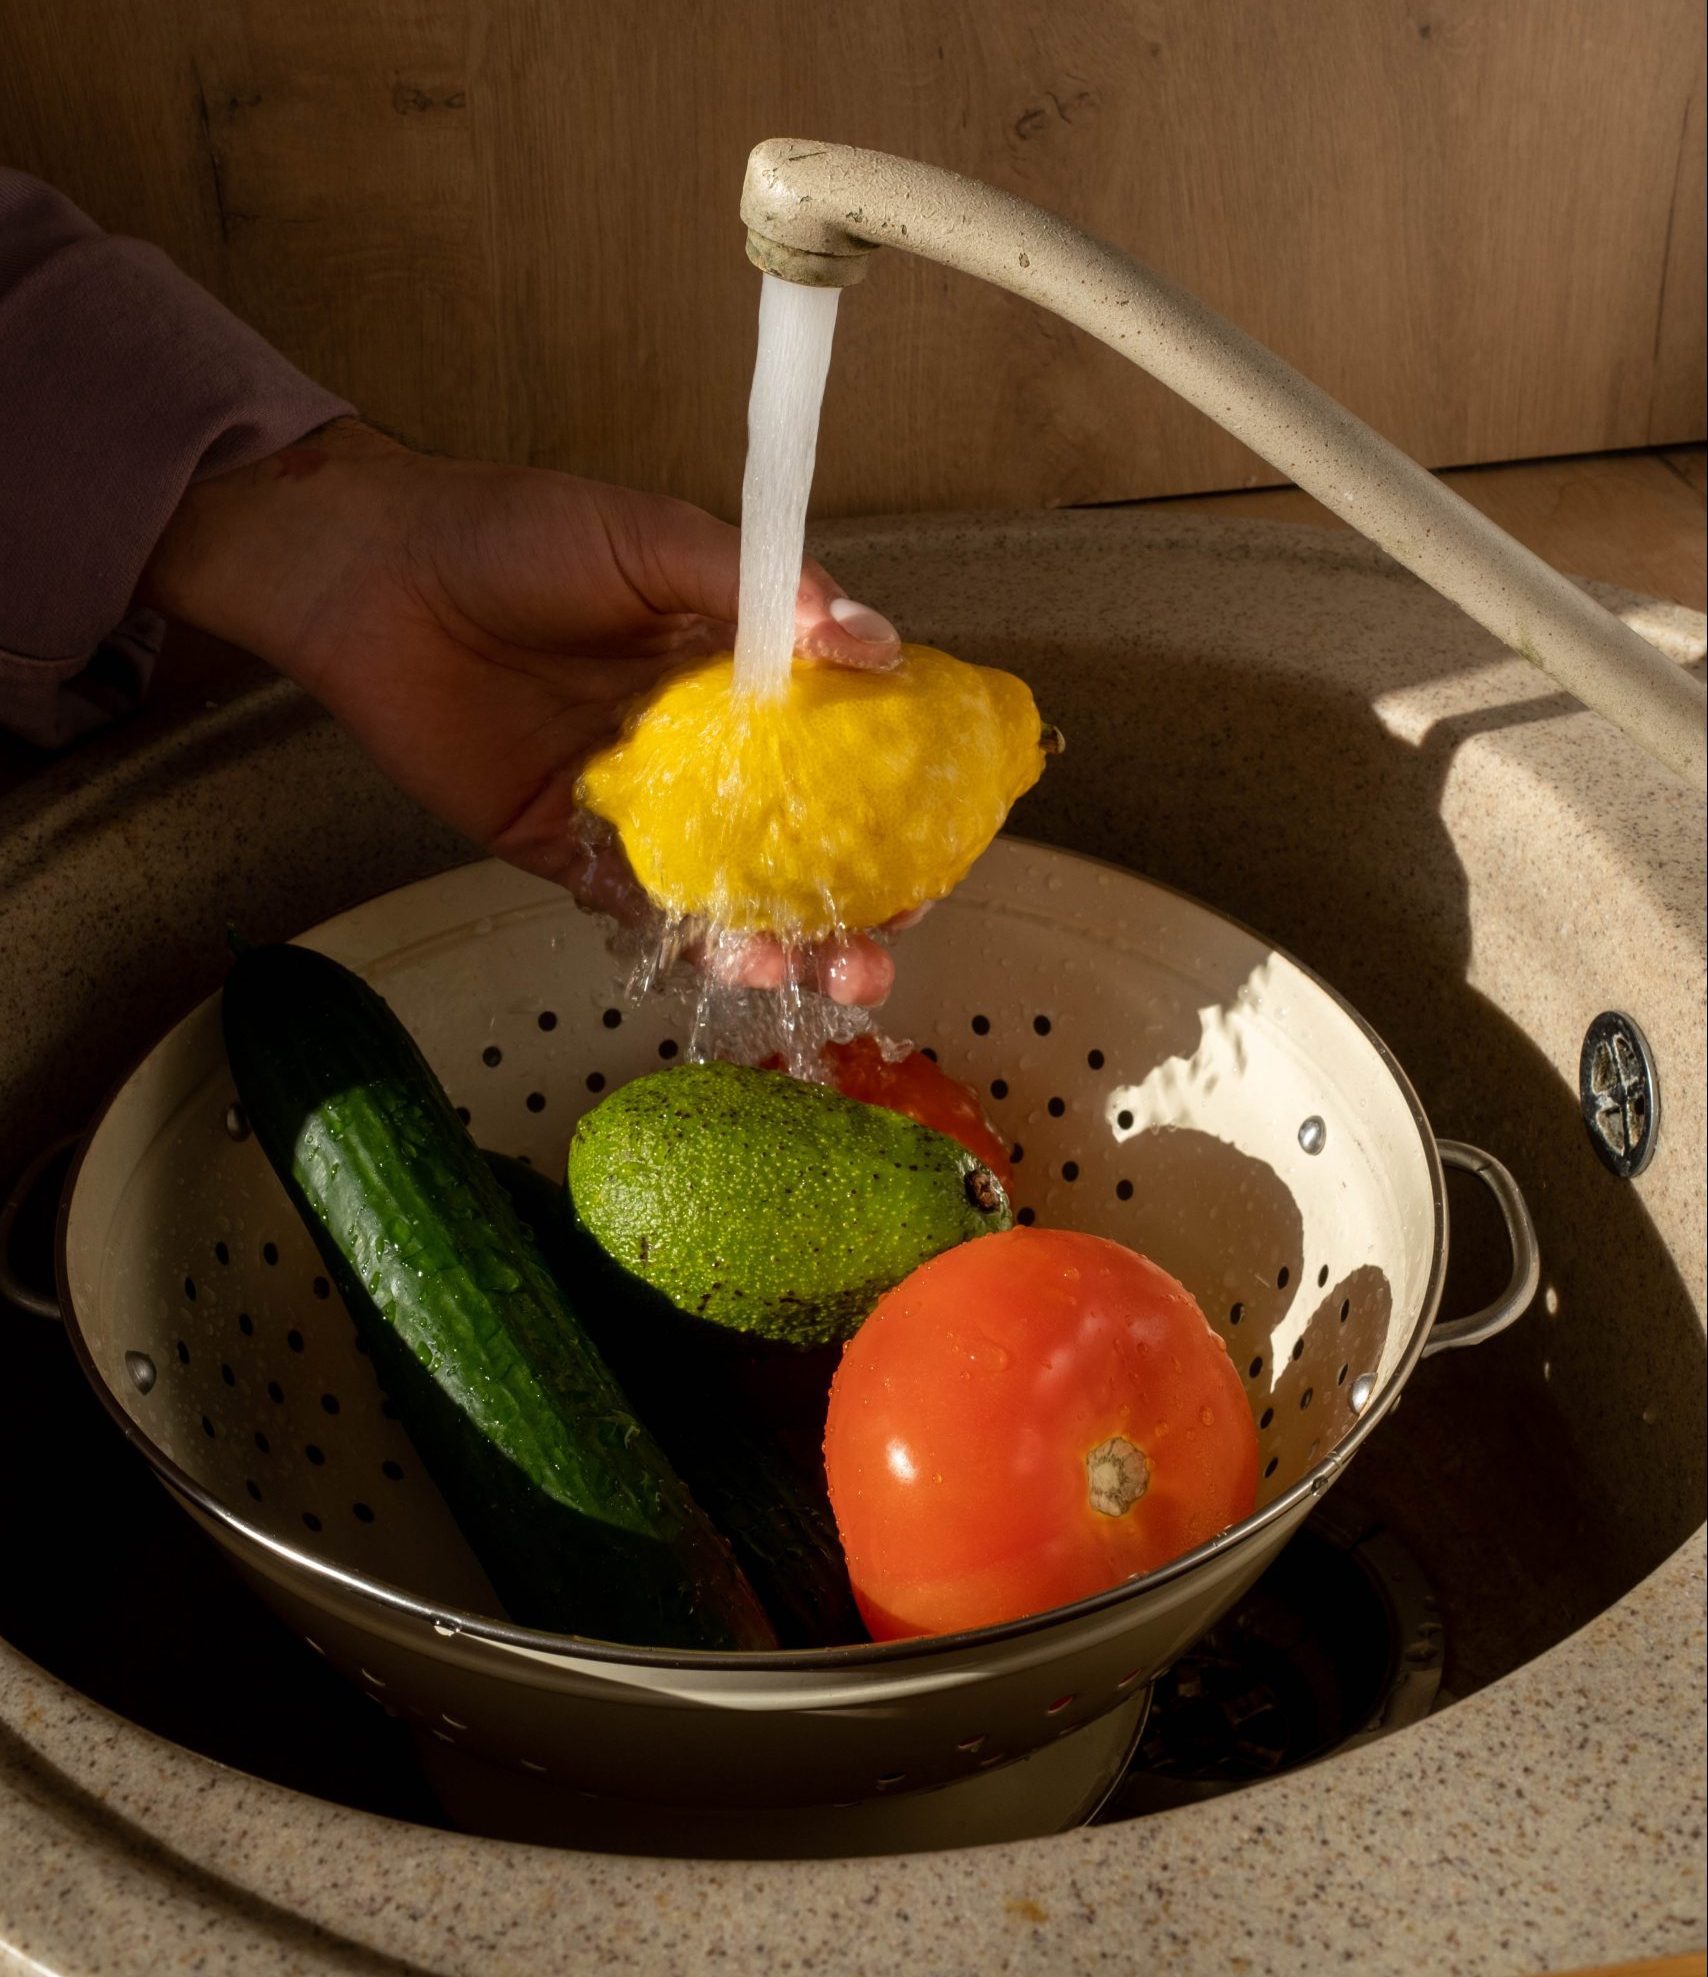 Fruits and vegetables being rinsed off